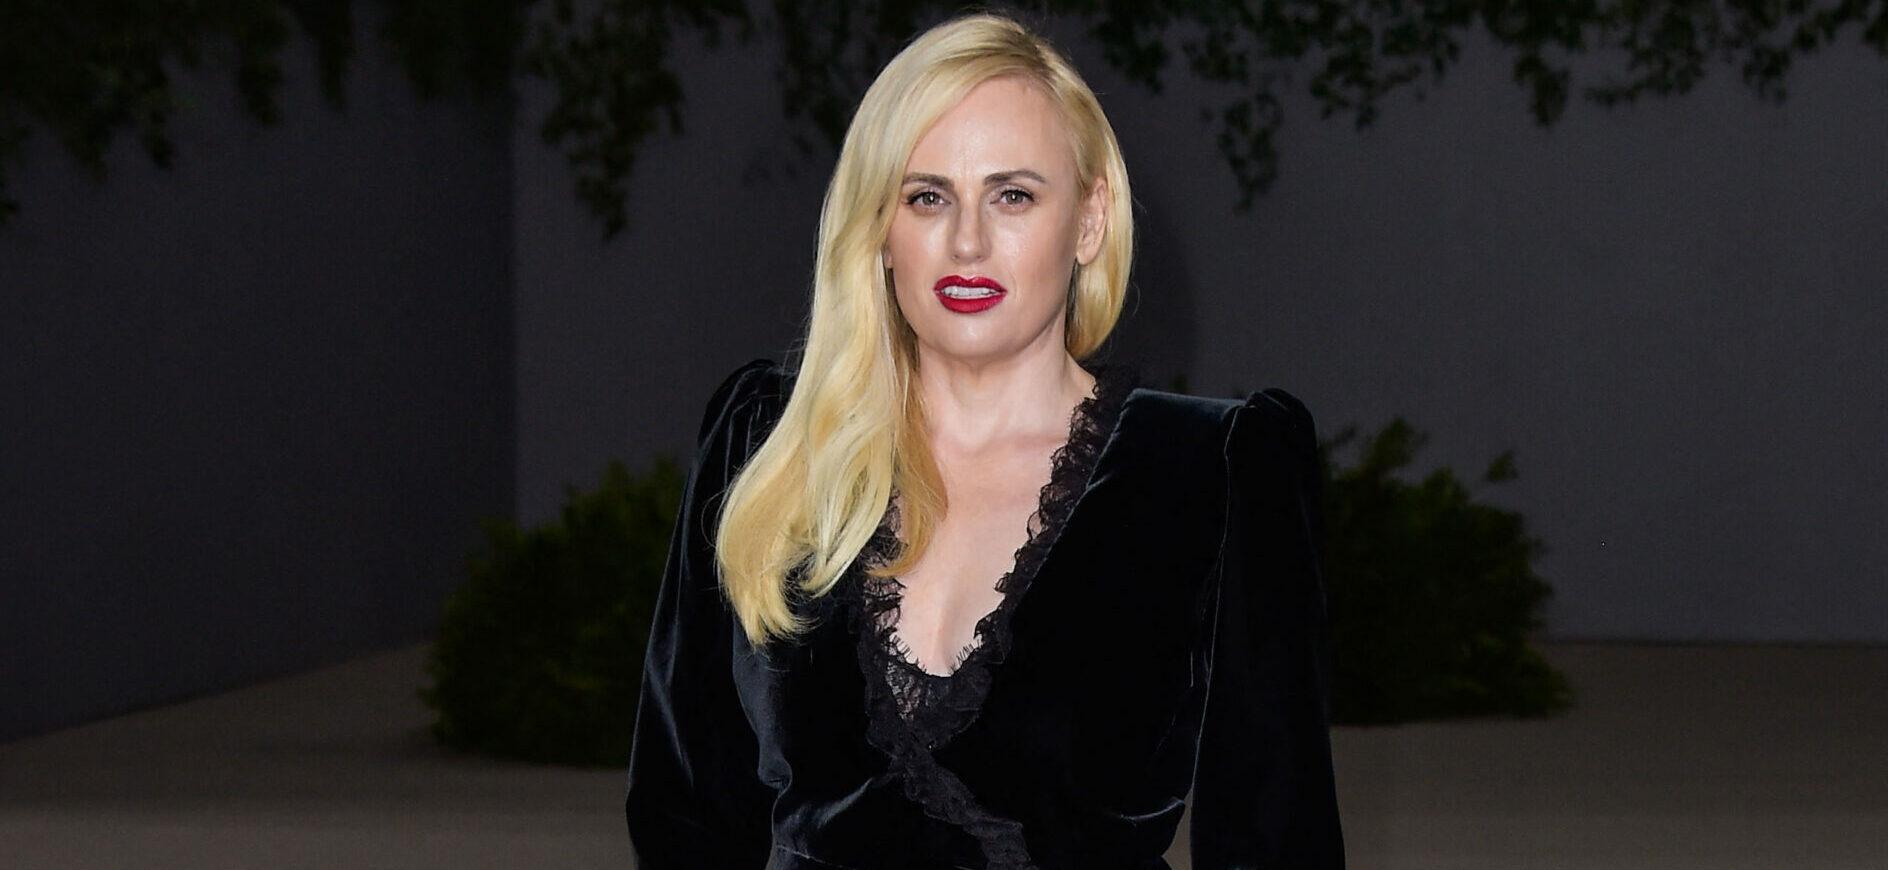 Rebel Wilson at the 2nd Annual Academy Museum of Motion Pictures Gala - Arrivals